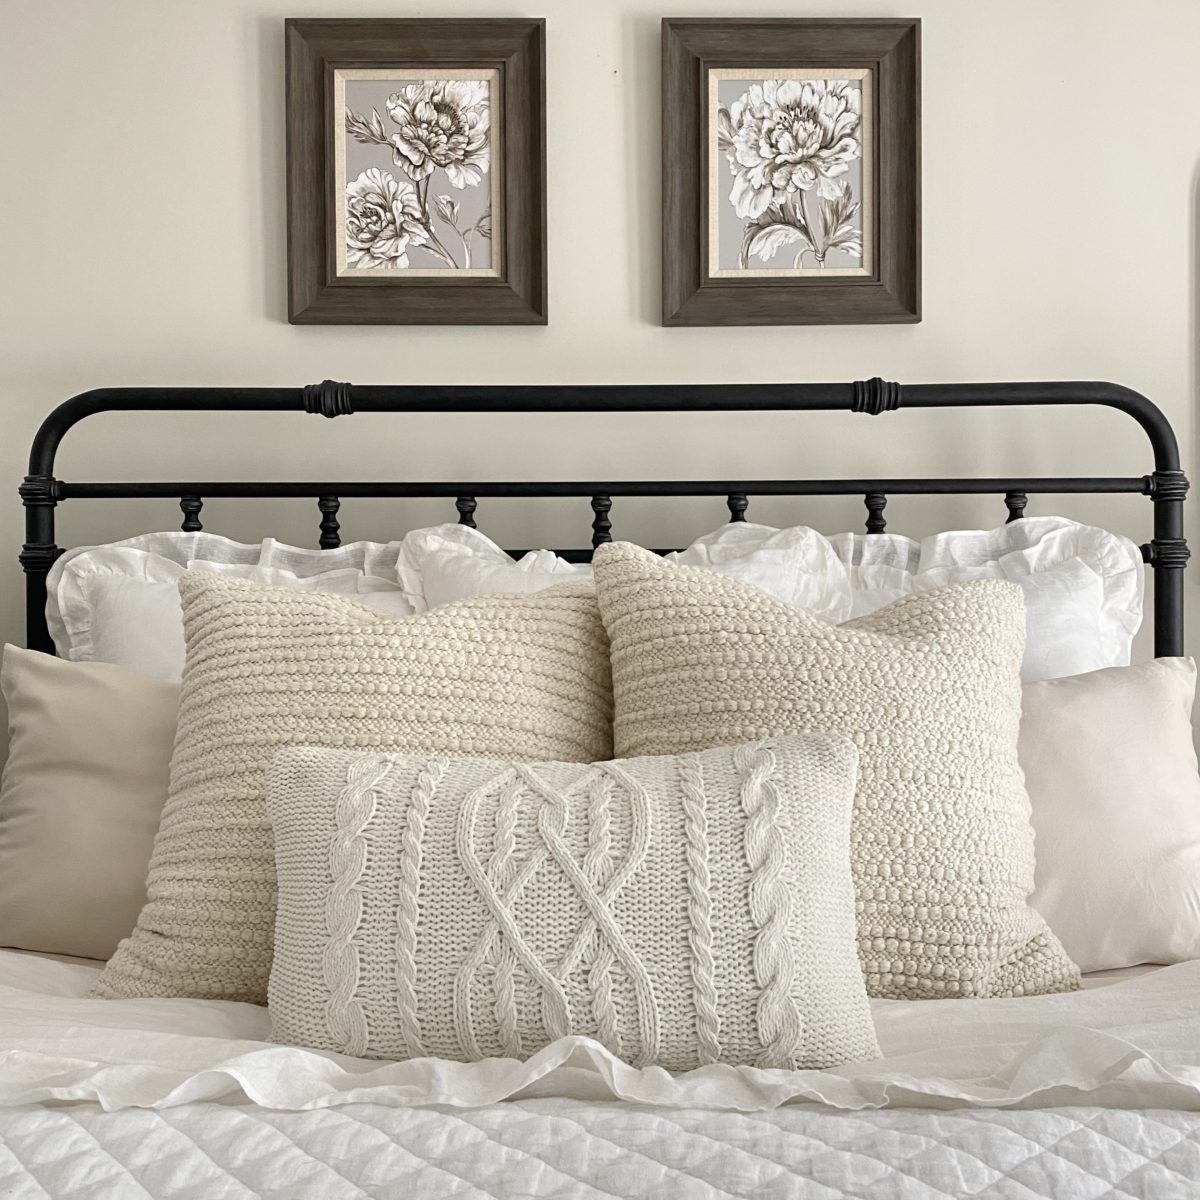 White and off white textured pillows on an iron bed.